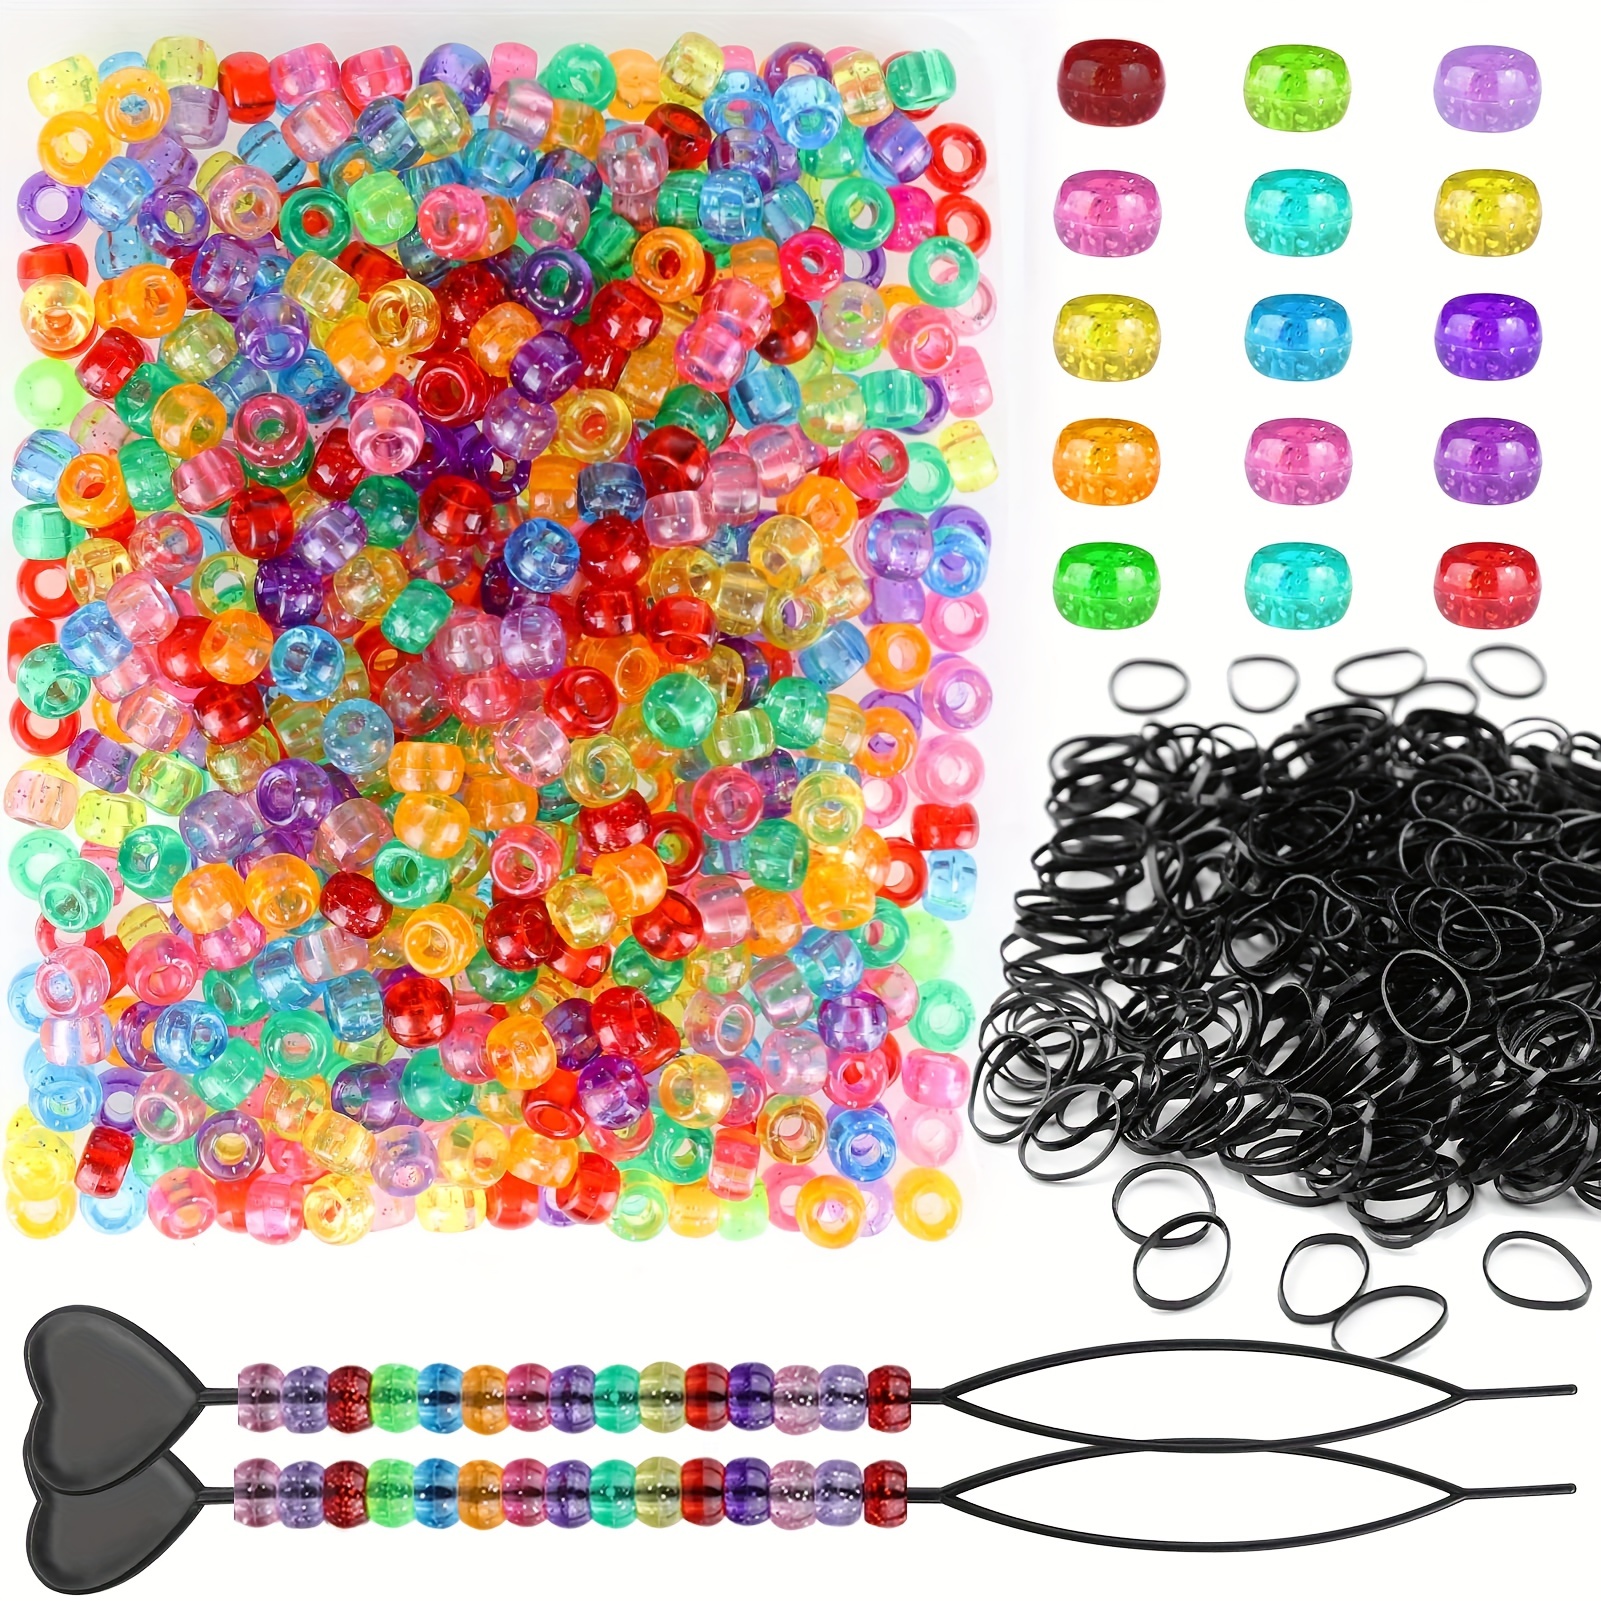 Pony Beads Bracelet Making Kit, Rainbow Kandi Beads for Jewelry Making DIY, Hair  Beads for Braids for Girls Women with Hair Beaders Rubber Bands Elastic  String, Ideal School Gift 